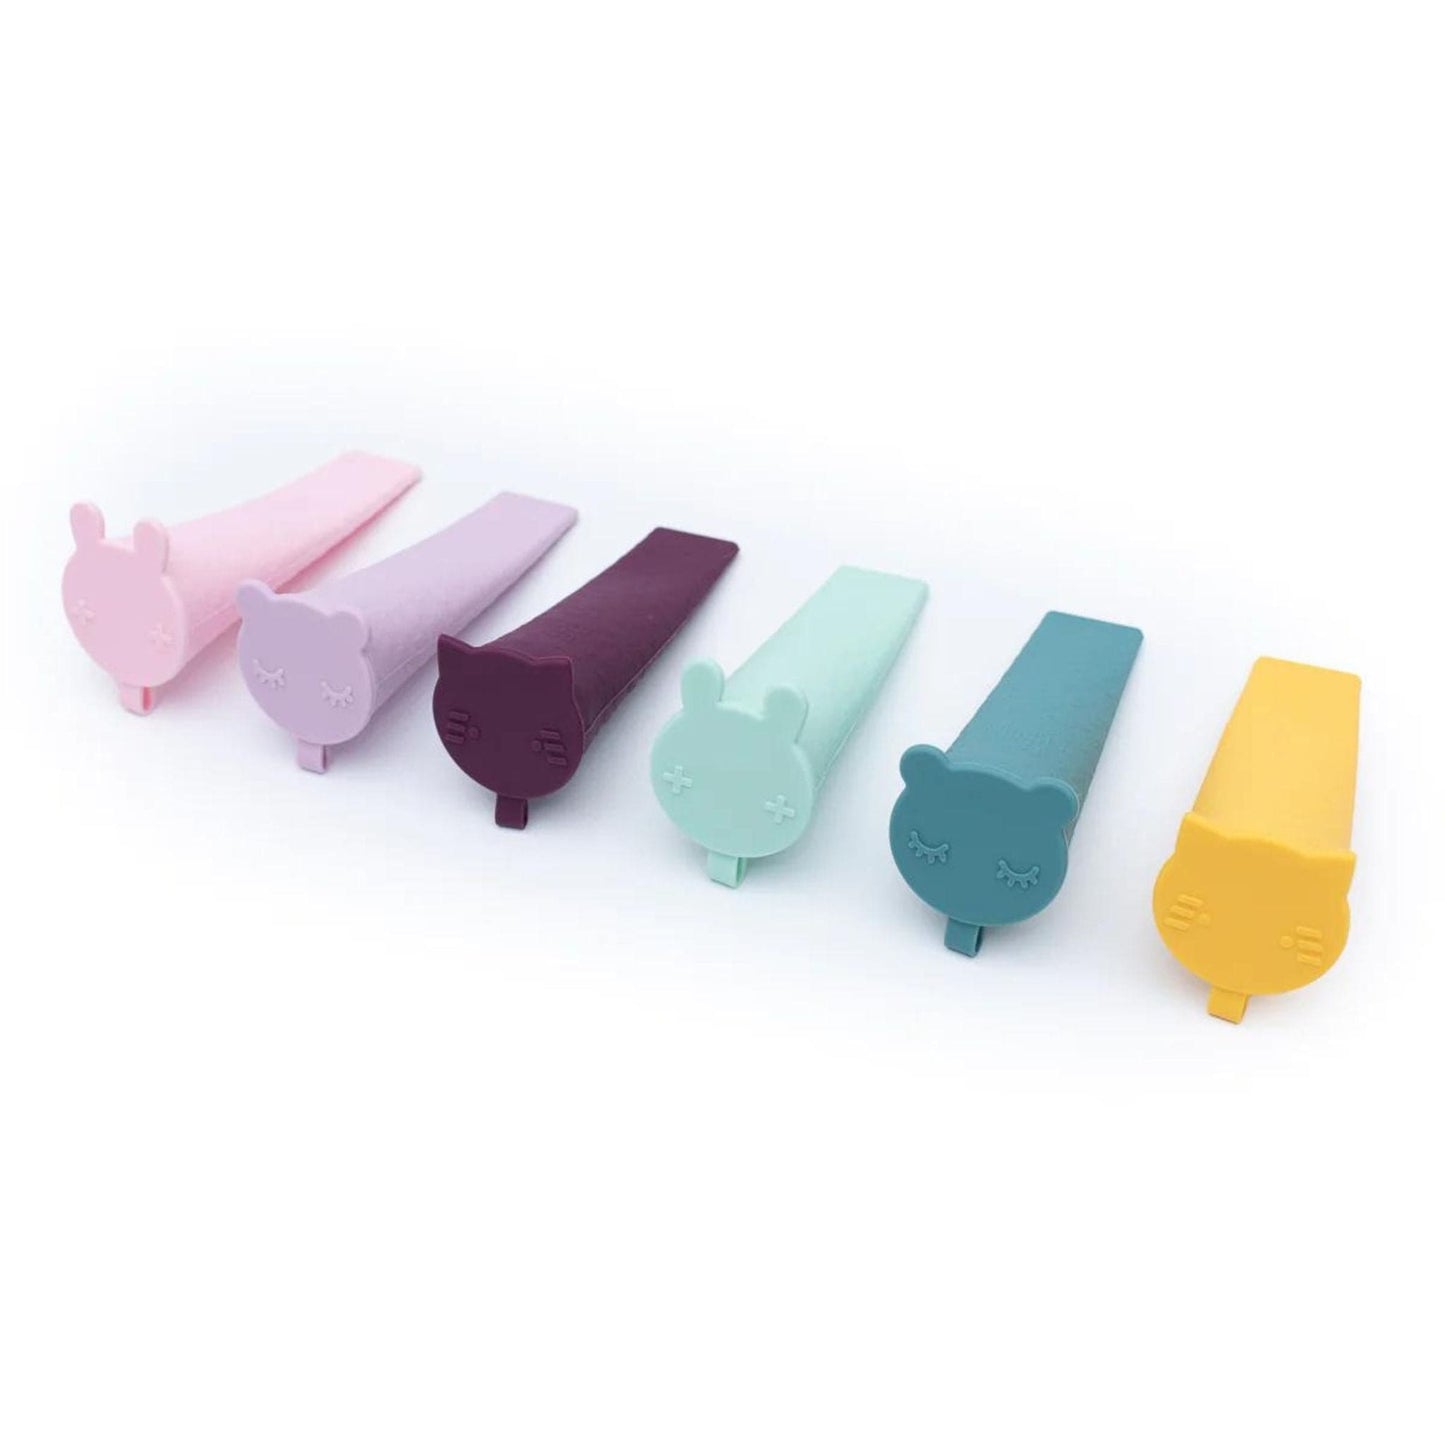 We Might Be Tiny Tubies Silicone Push Up Ice Block Moulds, Set of 6